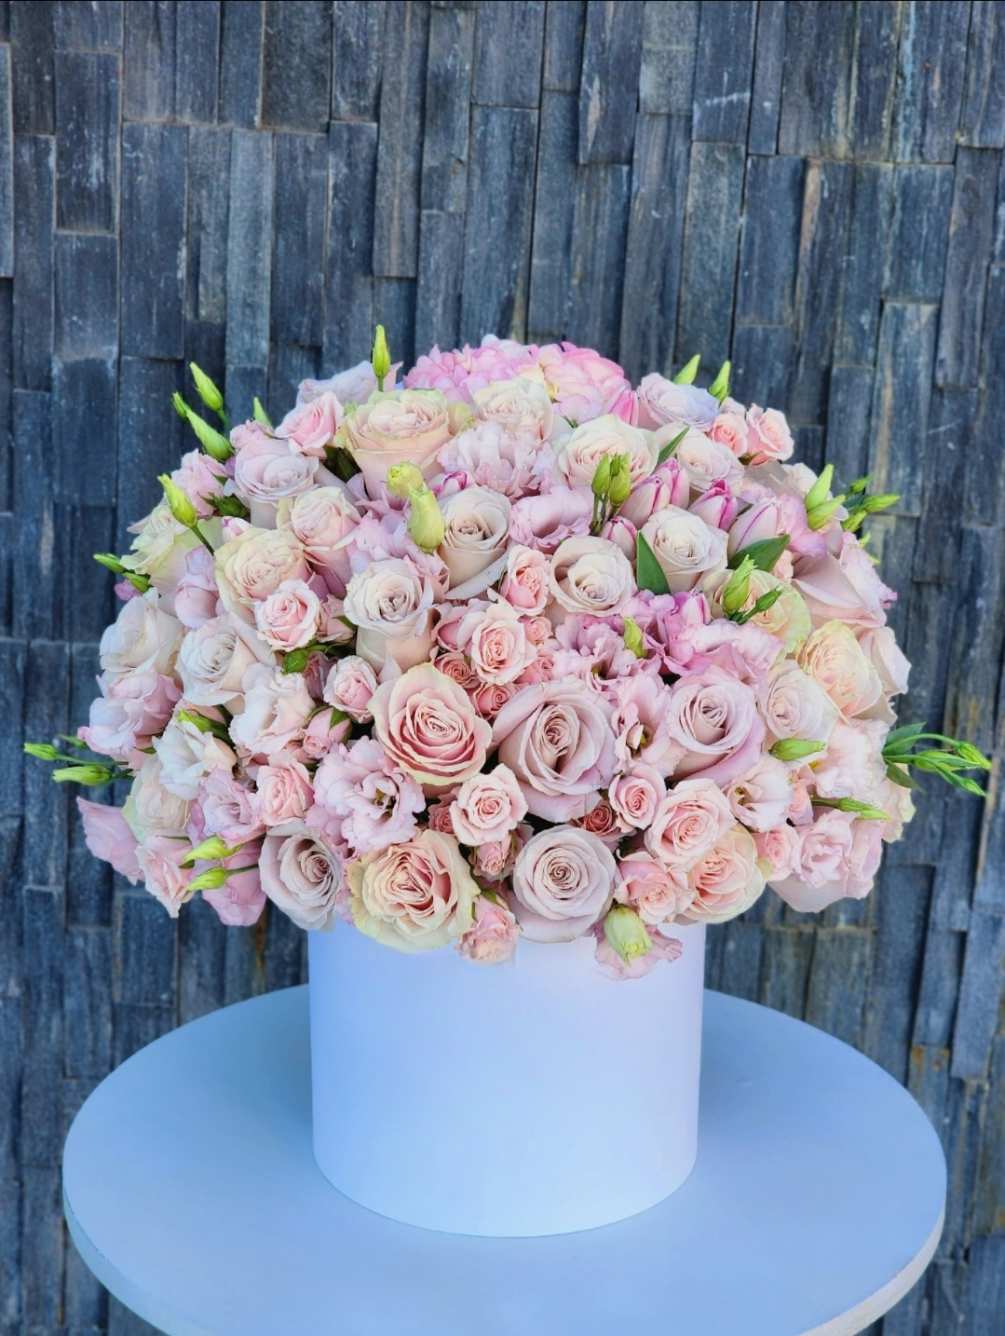 The lush pink mix of flowers arranged in a white elegant box